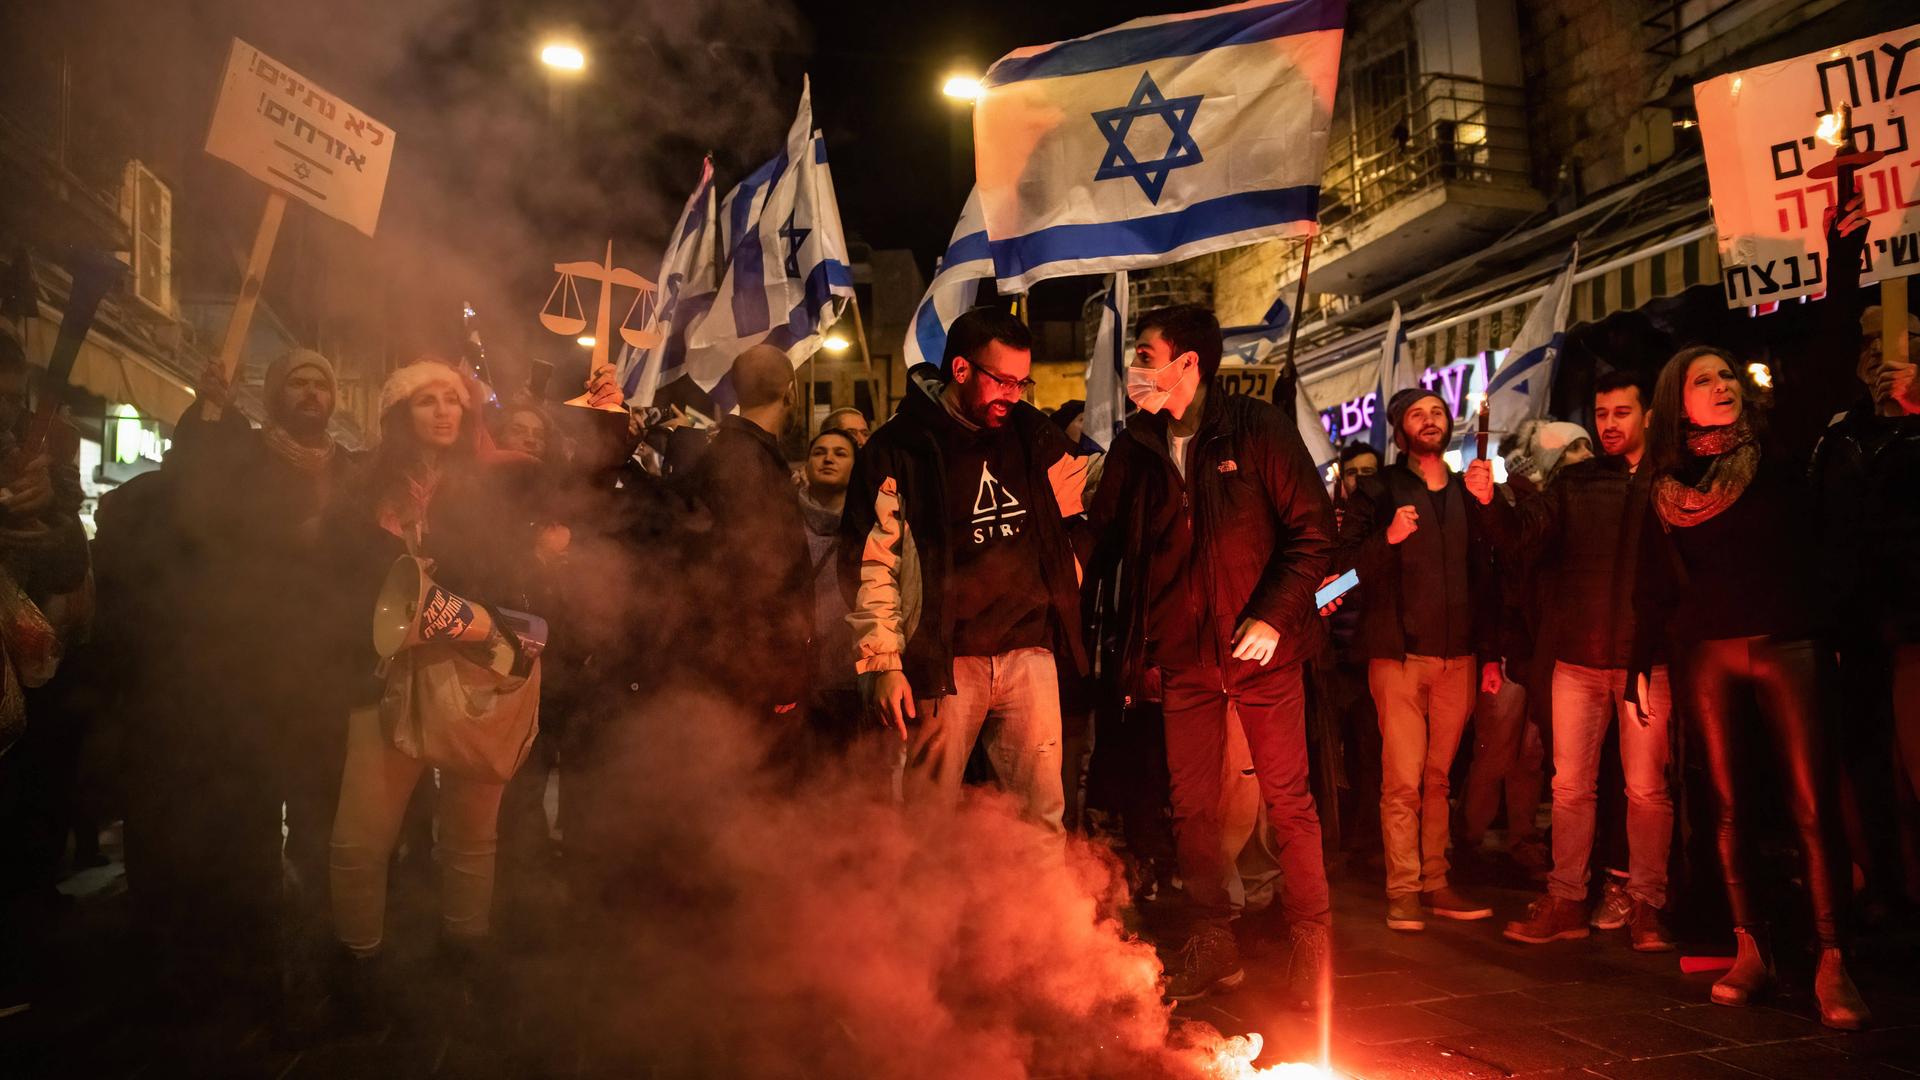 February 9, 2023, Jerusalem, Israel: Protesters light a torch in Jerusalem streets during the demonstration. Hundreds demonstrated against the new Israeli right-wing government and judicial overhaul in Jerusalem. Jerusalem Israel - ZUMAs197 20230209_zaa_s197_342 Copyright: xMatanxGolanx